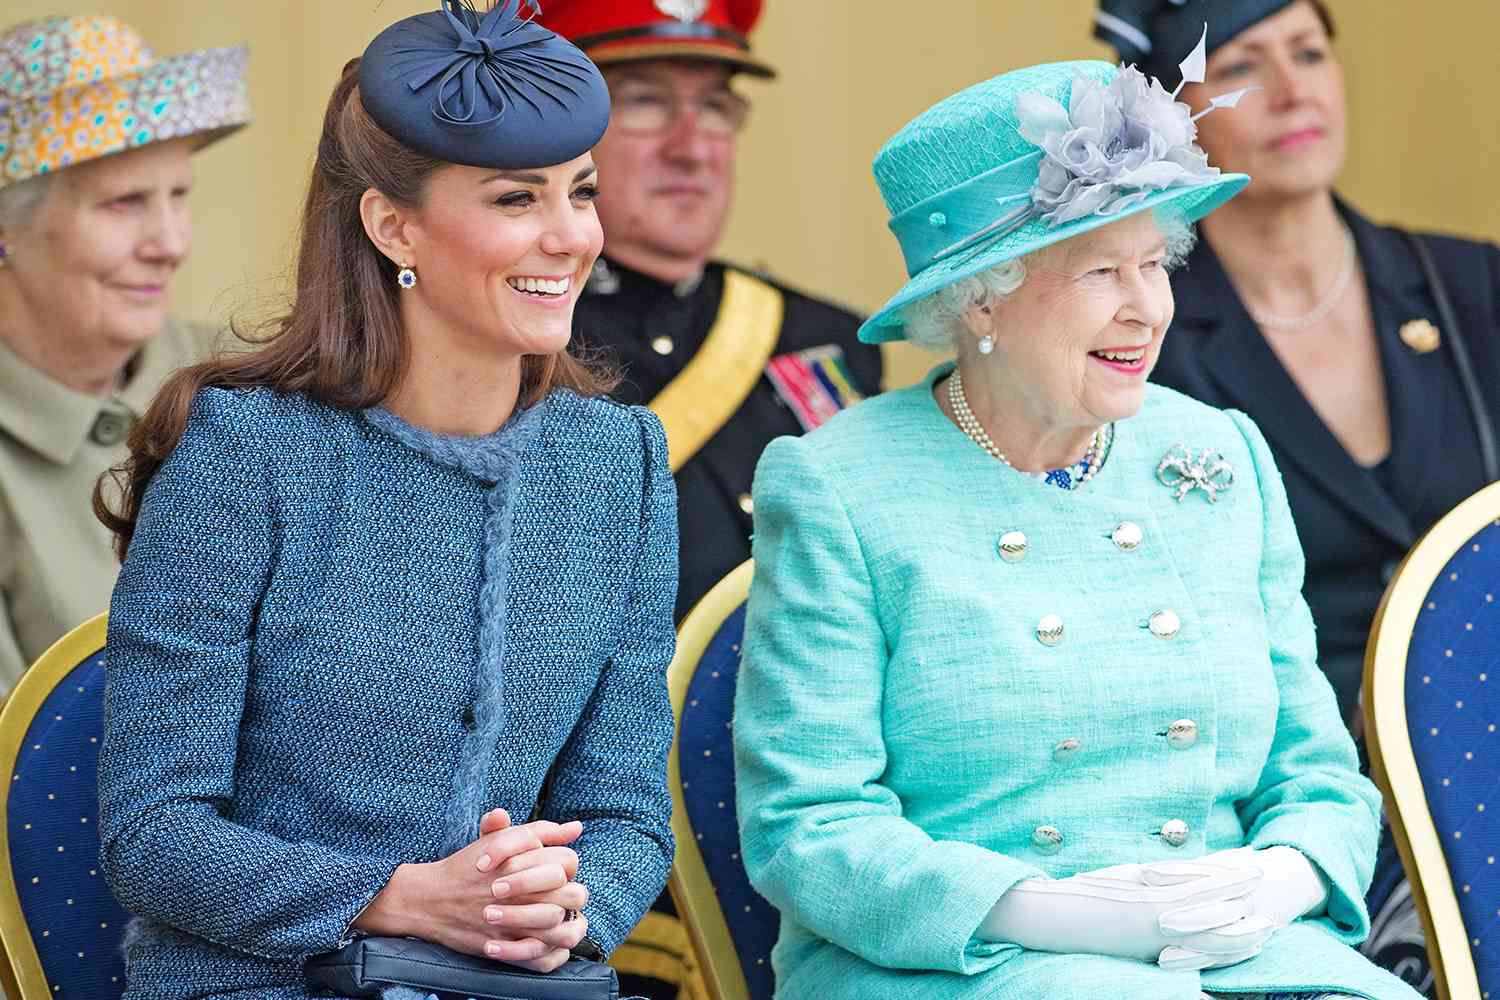 NOTTINGHAM - JUNE 13: Queen Elizabeth ll and Catherine, Duchess of Cambridge visit Vernon Park during a Diamond Jubilee visit to Nottingham on June 13, 2012 in Nottingham, England. (Photo by Anwar Hussein/WireImage)